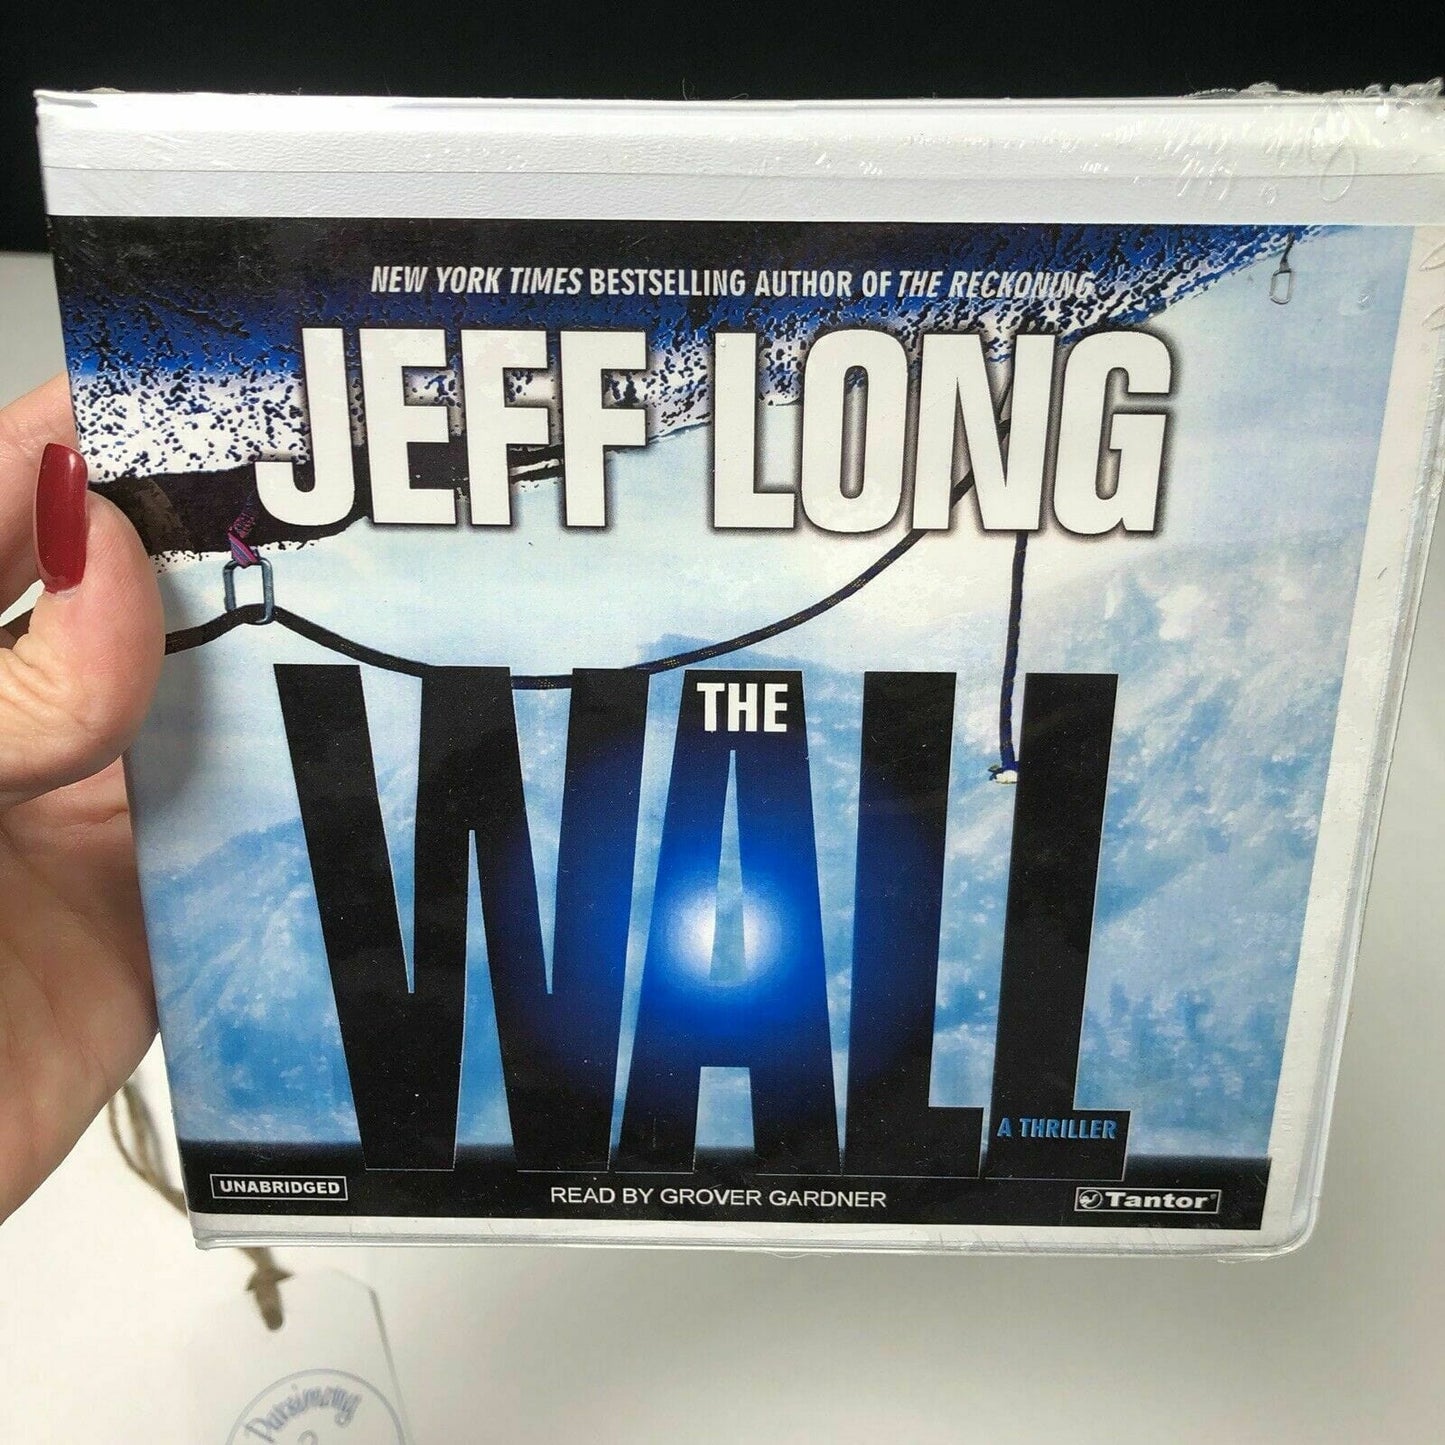 The Wall: A Thriller by Jeff Long Audio Book Read By Grover Gardner New In Pkg